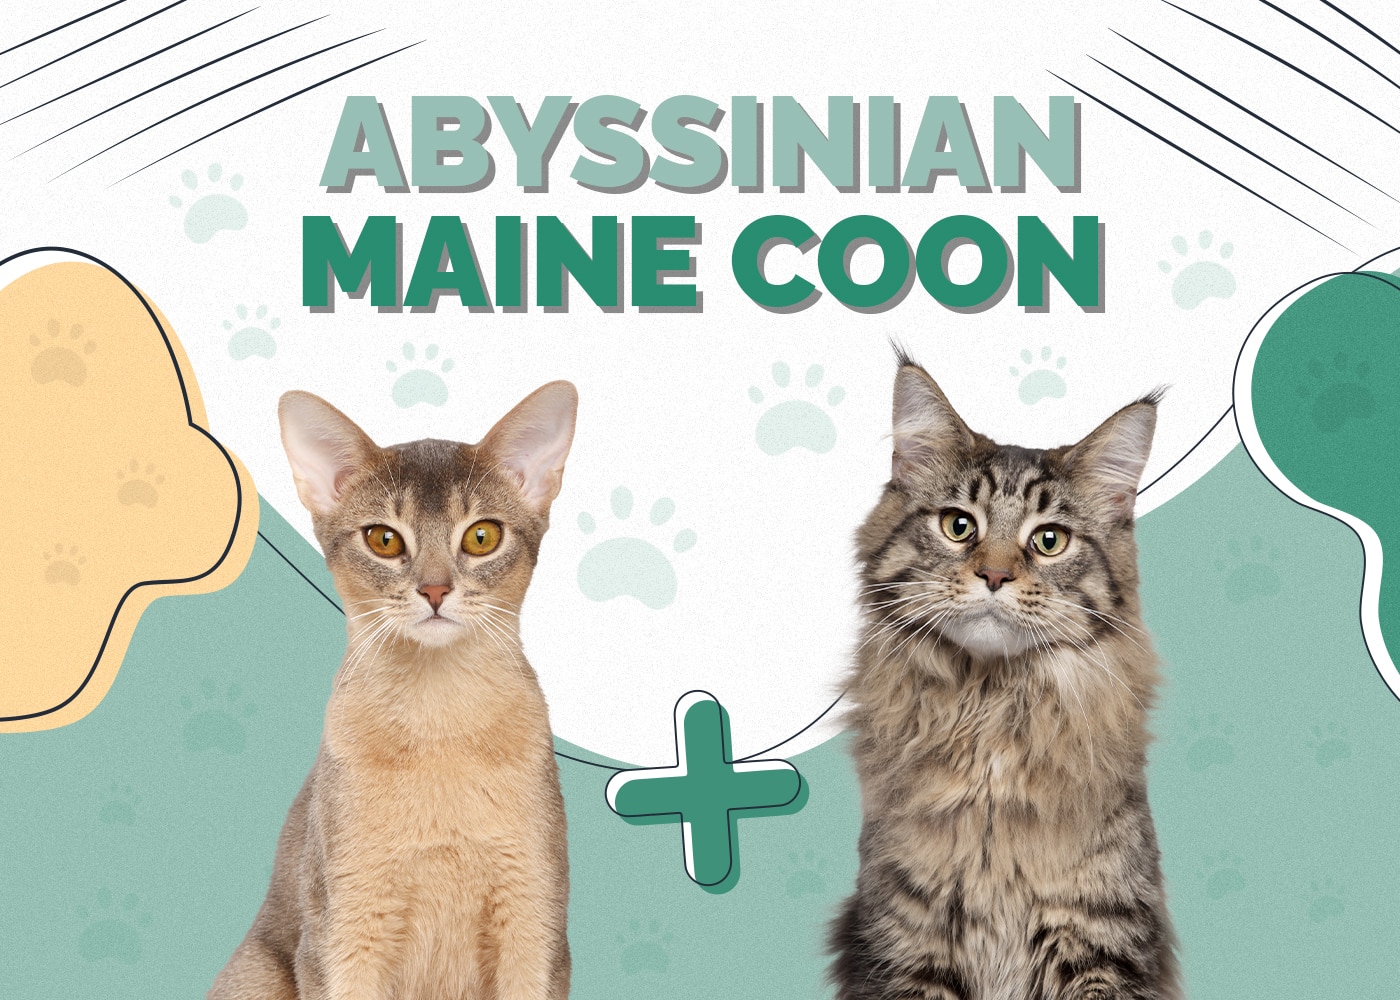 Abyssian + maine coon cat